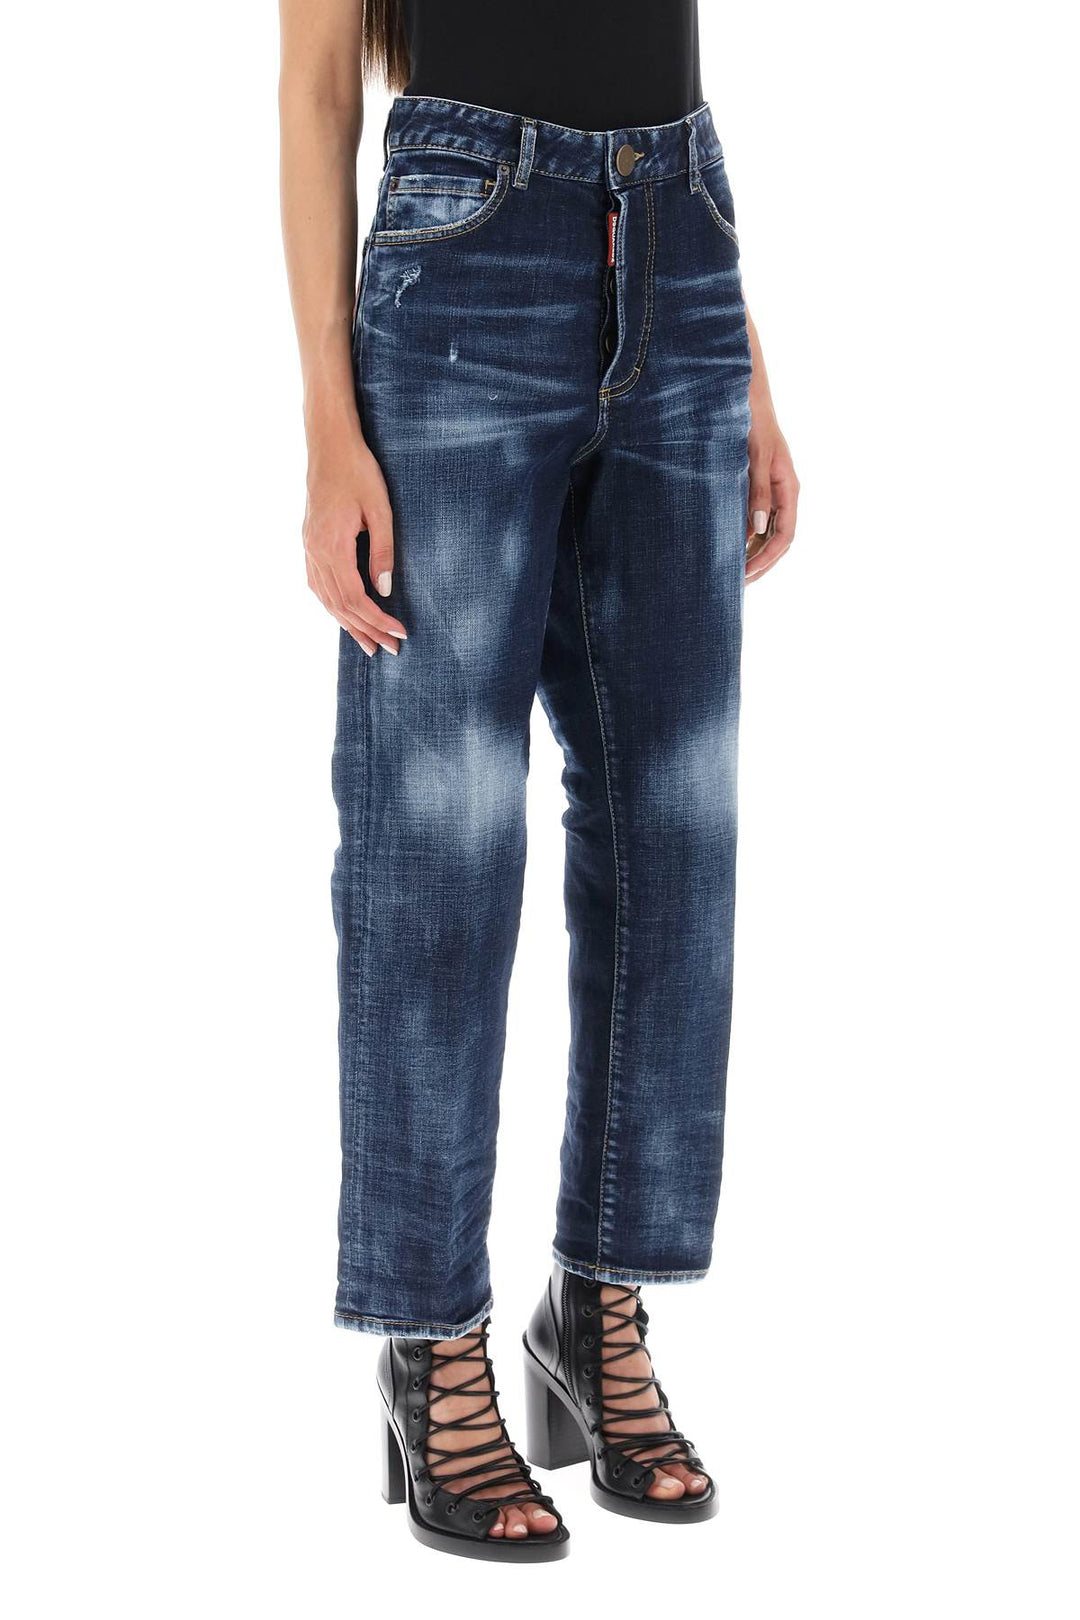 Dsquared2 'Boston' Cropped Jeans   Blue